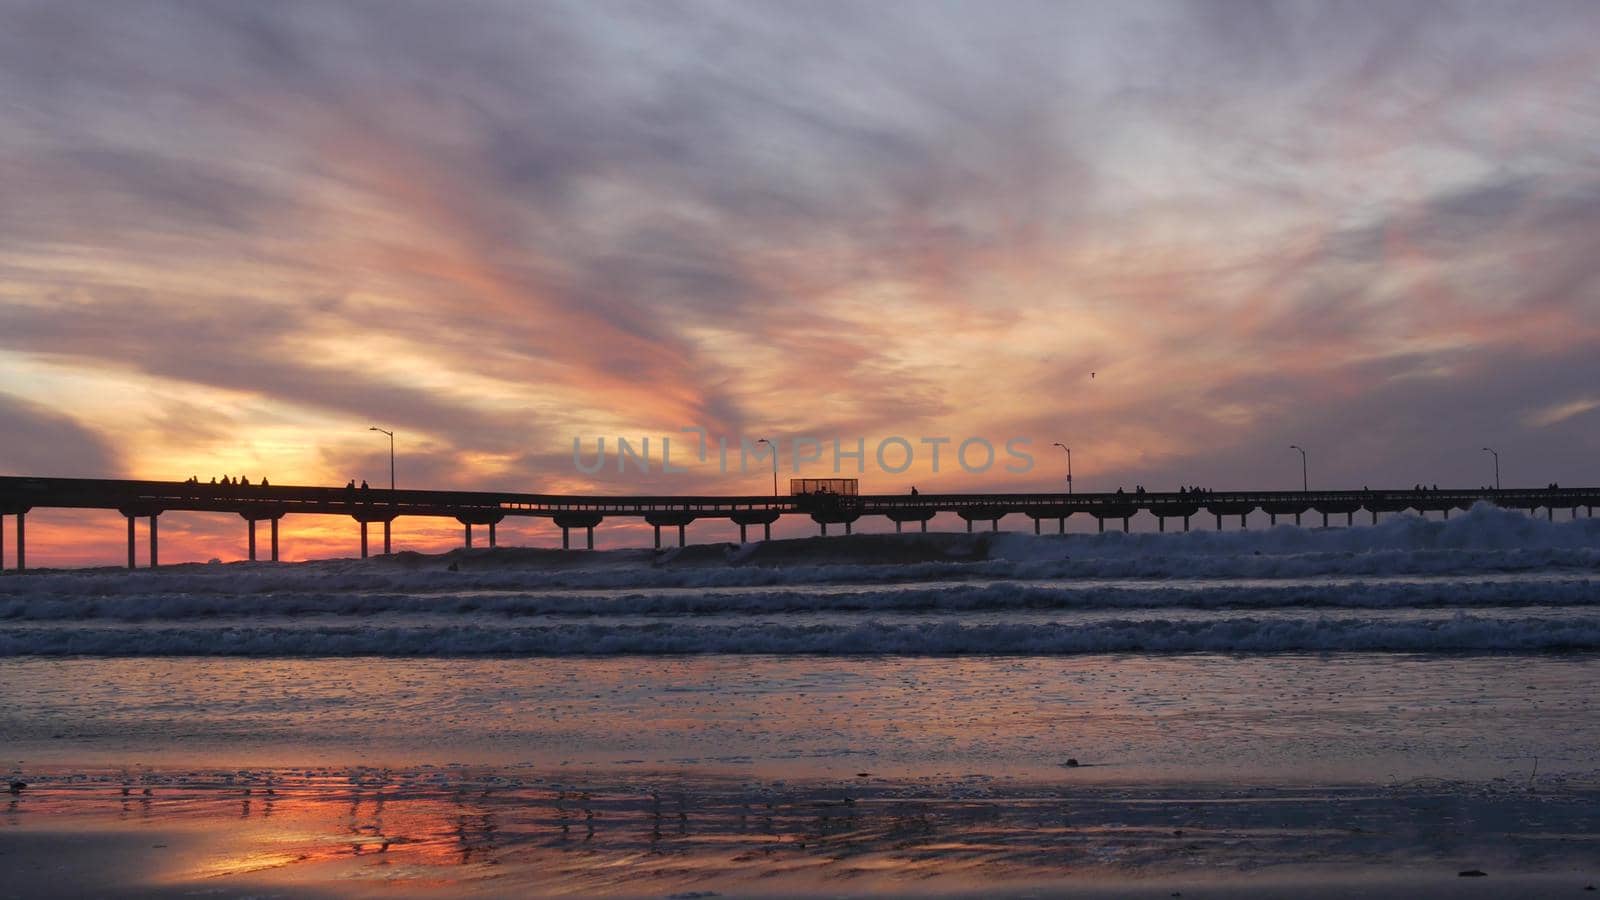 Silhouette of people walking, surfers surfing by pier in sea water. Ocean waves, dramatic sky at sunset. California coast, beach or shore vibes at sundown. Summer seascape seamless looped cinemagraph.